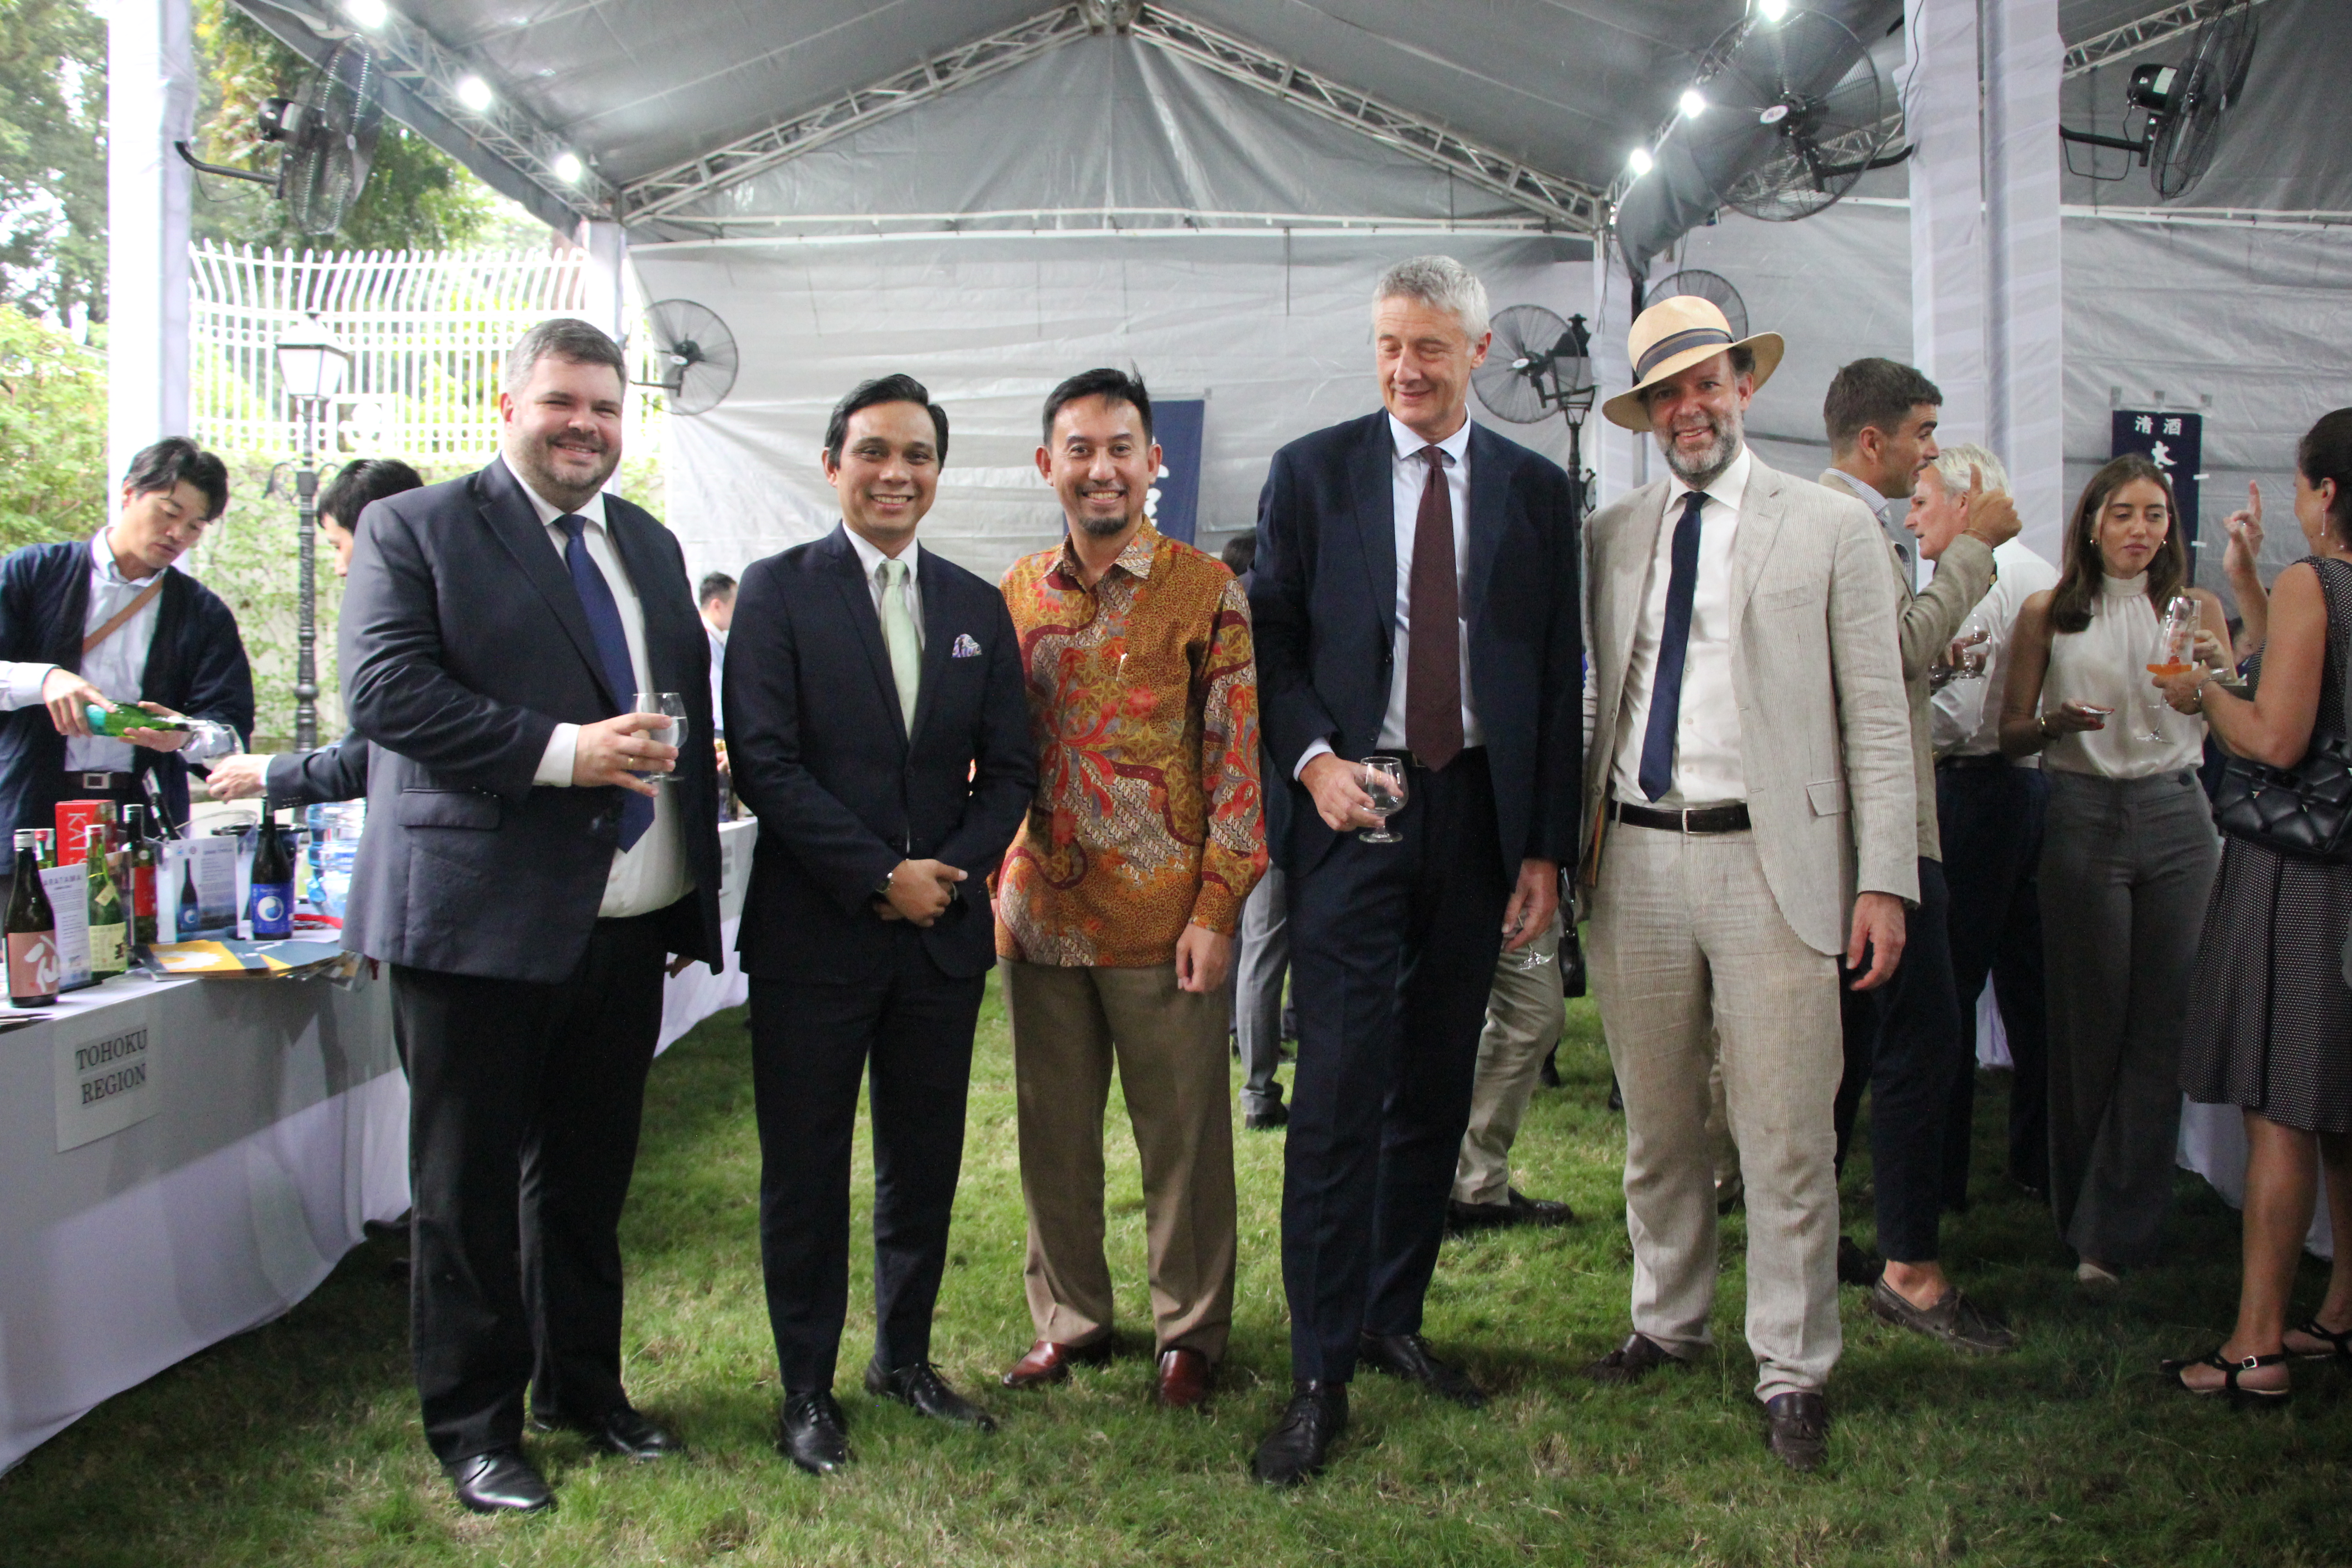 (L to R) Consuls General of the Netherlands, Italy, Indonesia, Malaysia, and Hungary pose for a photo at the event. Photo: Ngoc Dong / Tuoi Tre News